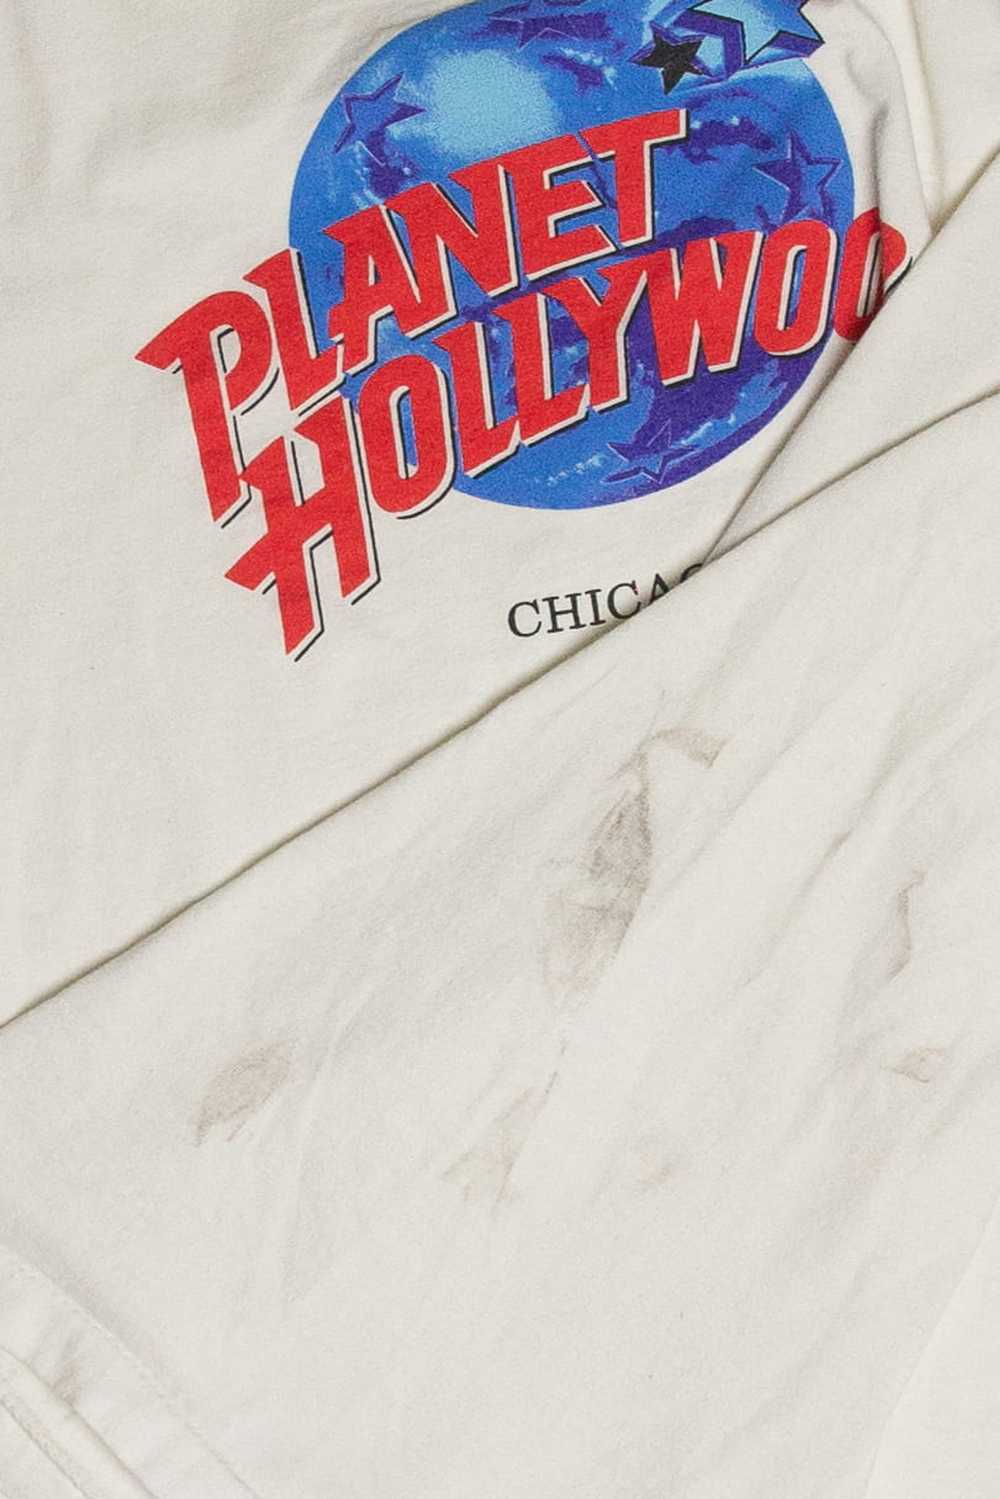 Vintage Planet Hollywood Chicago T-Shirt - image 3